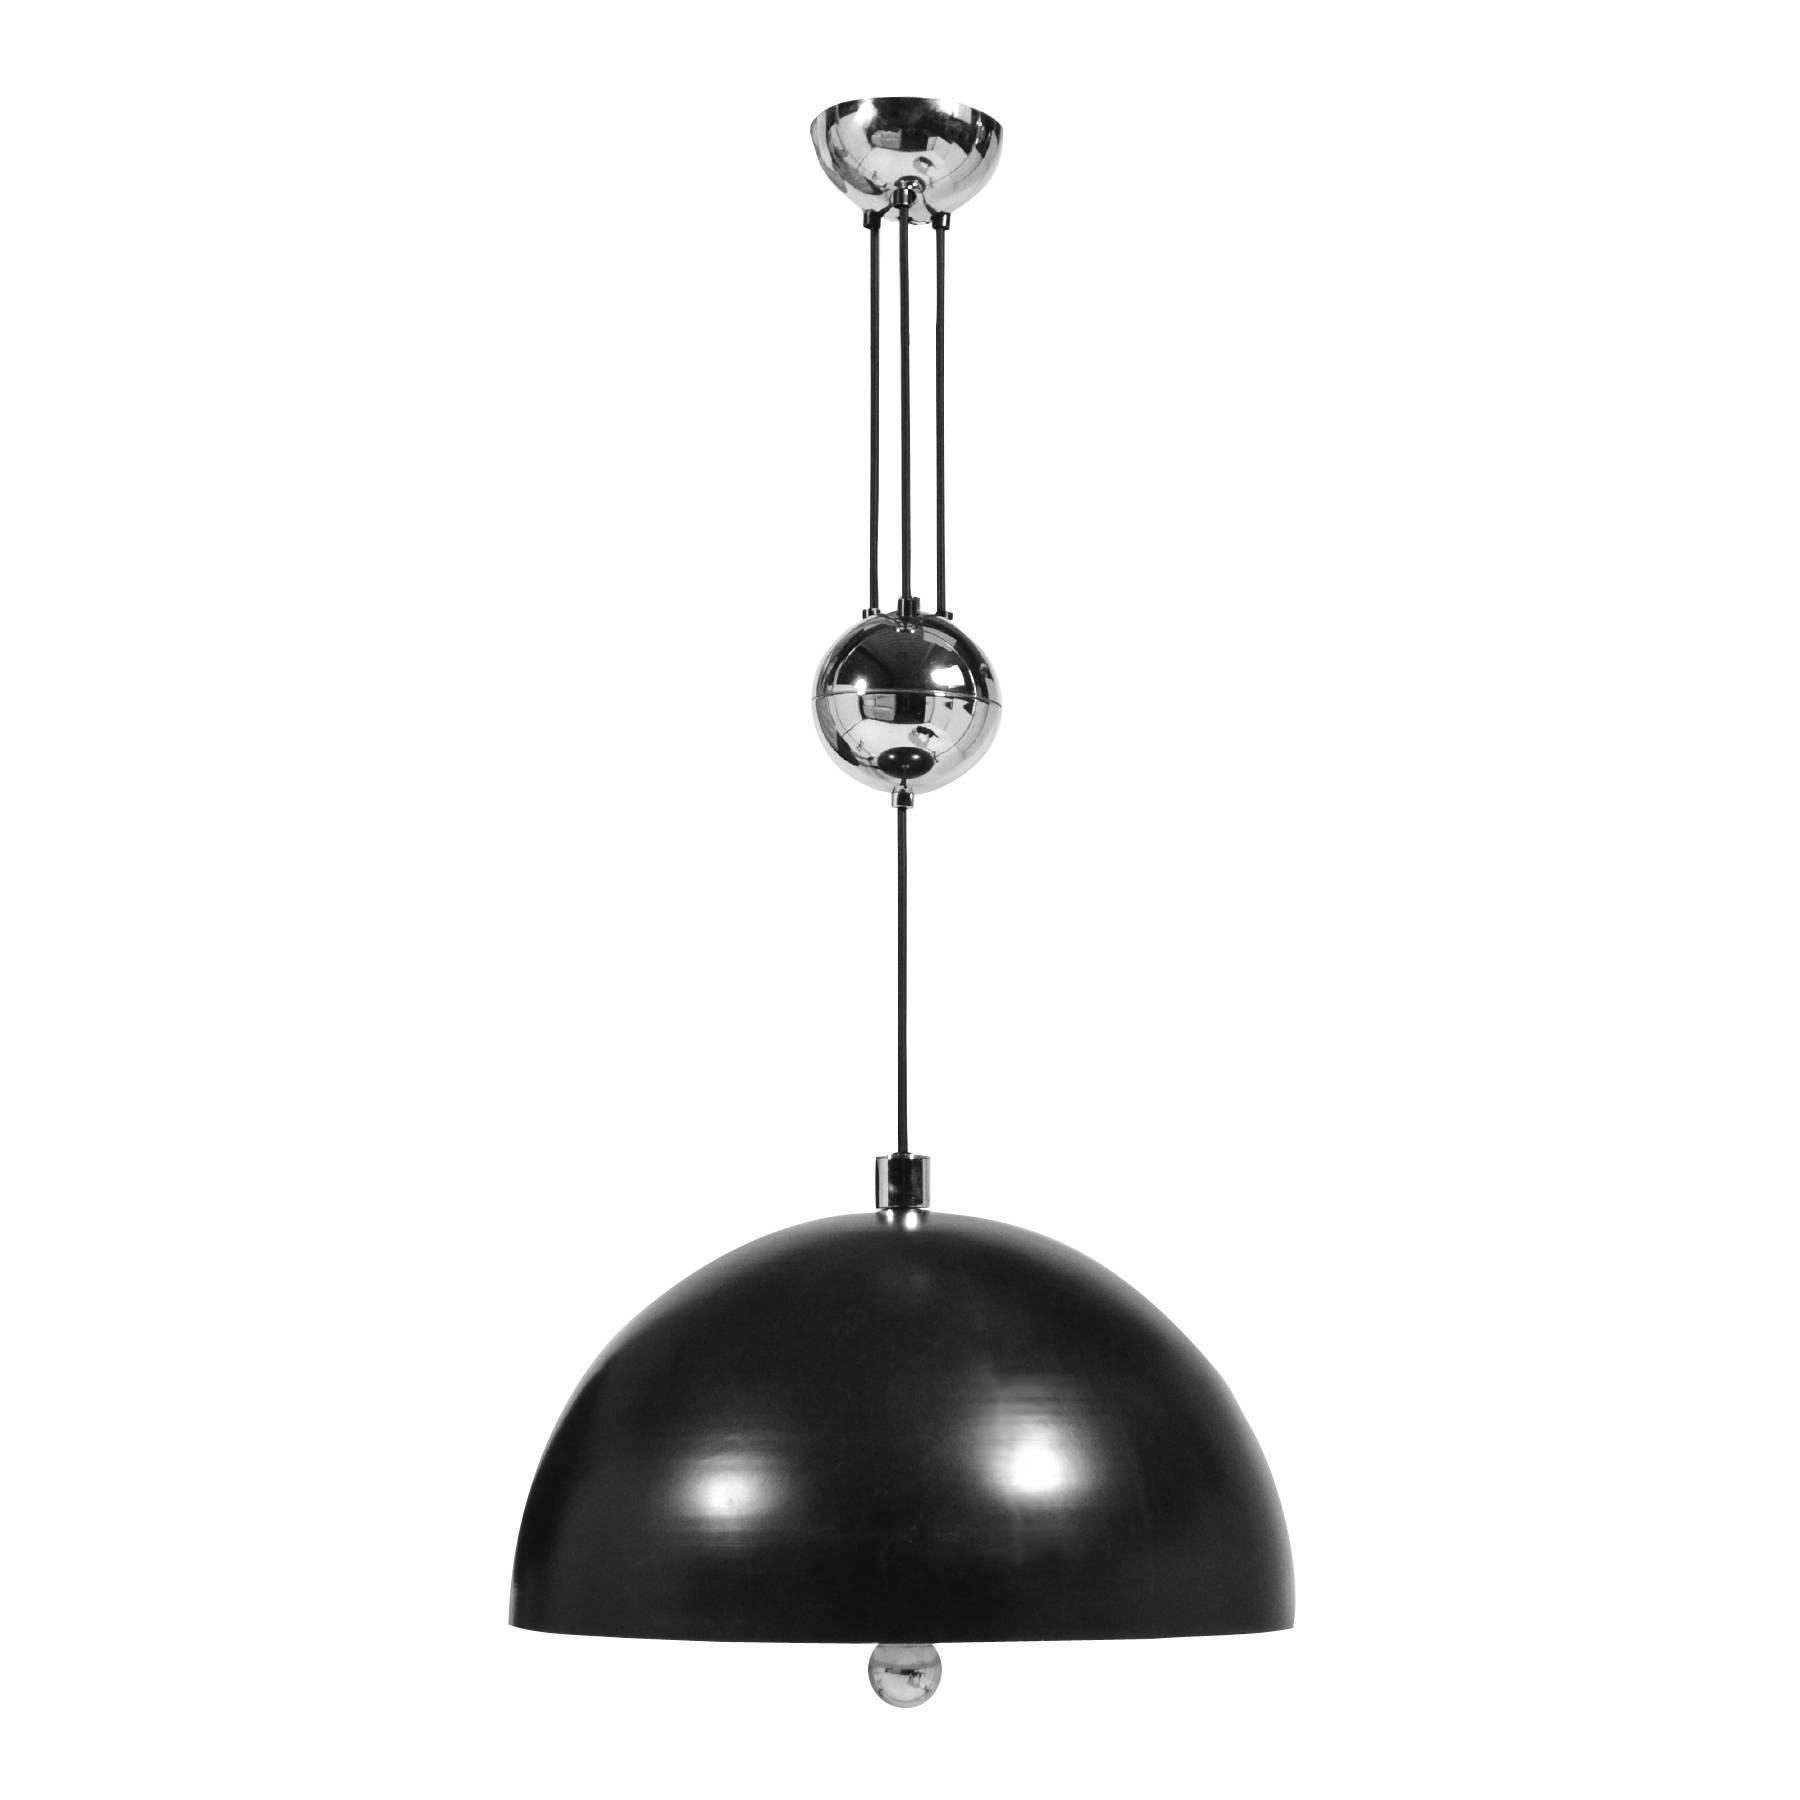 This striking pendant lamp by Florian Schultz is incredibly well made and very versatile with the adjustable drop. The substantial lamp features a wonderful round chrome pull handle and a white Lucite bulb diffuser to prevent glare.

The shade is